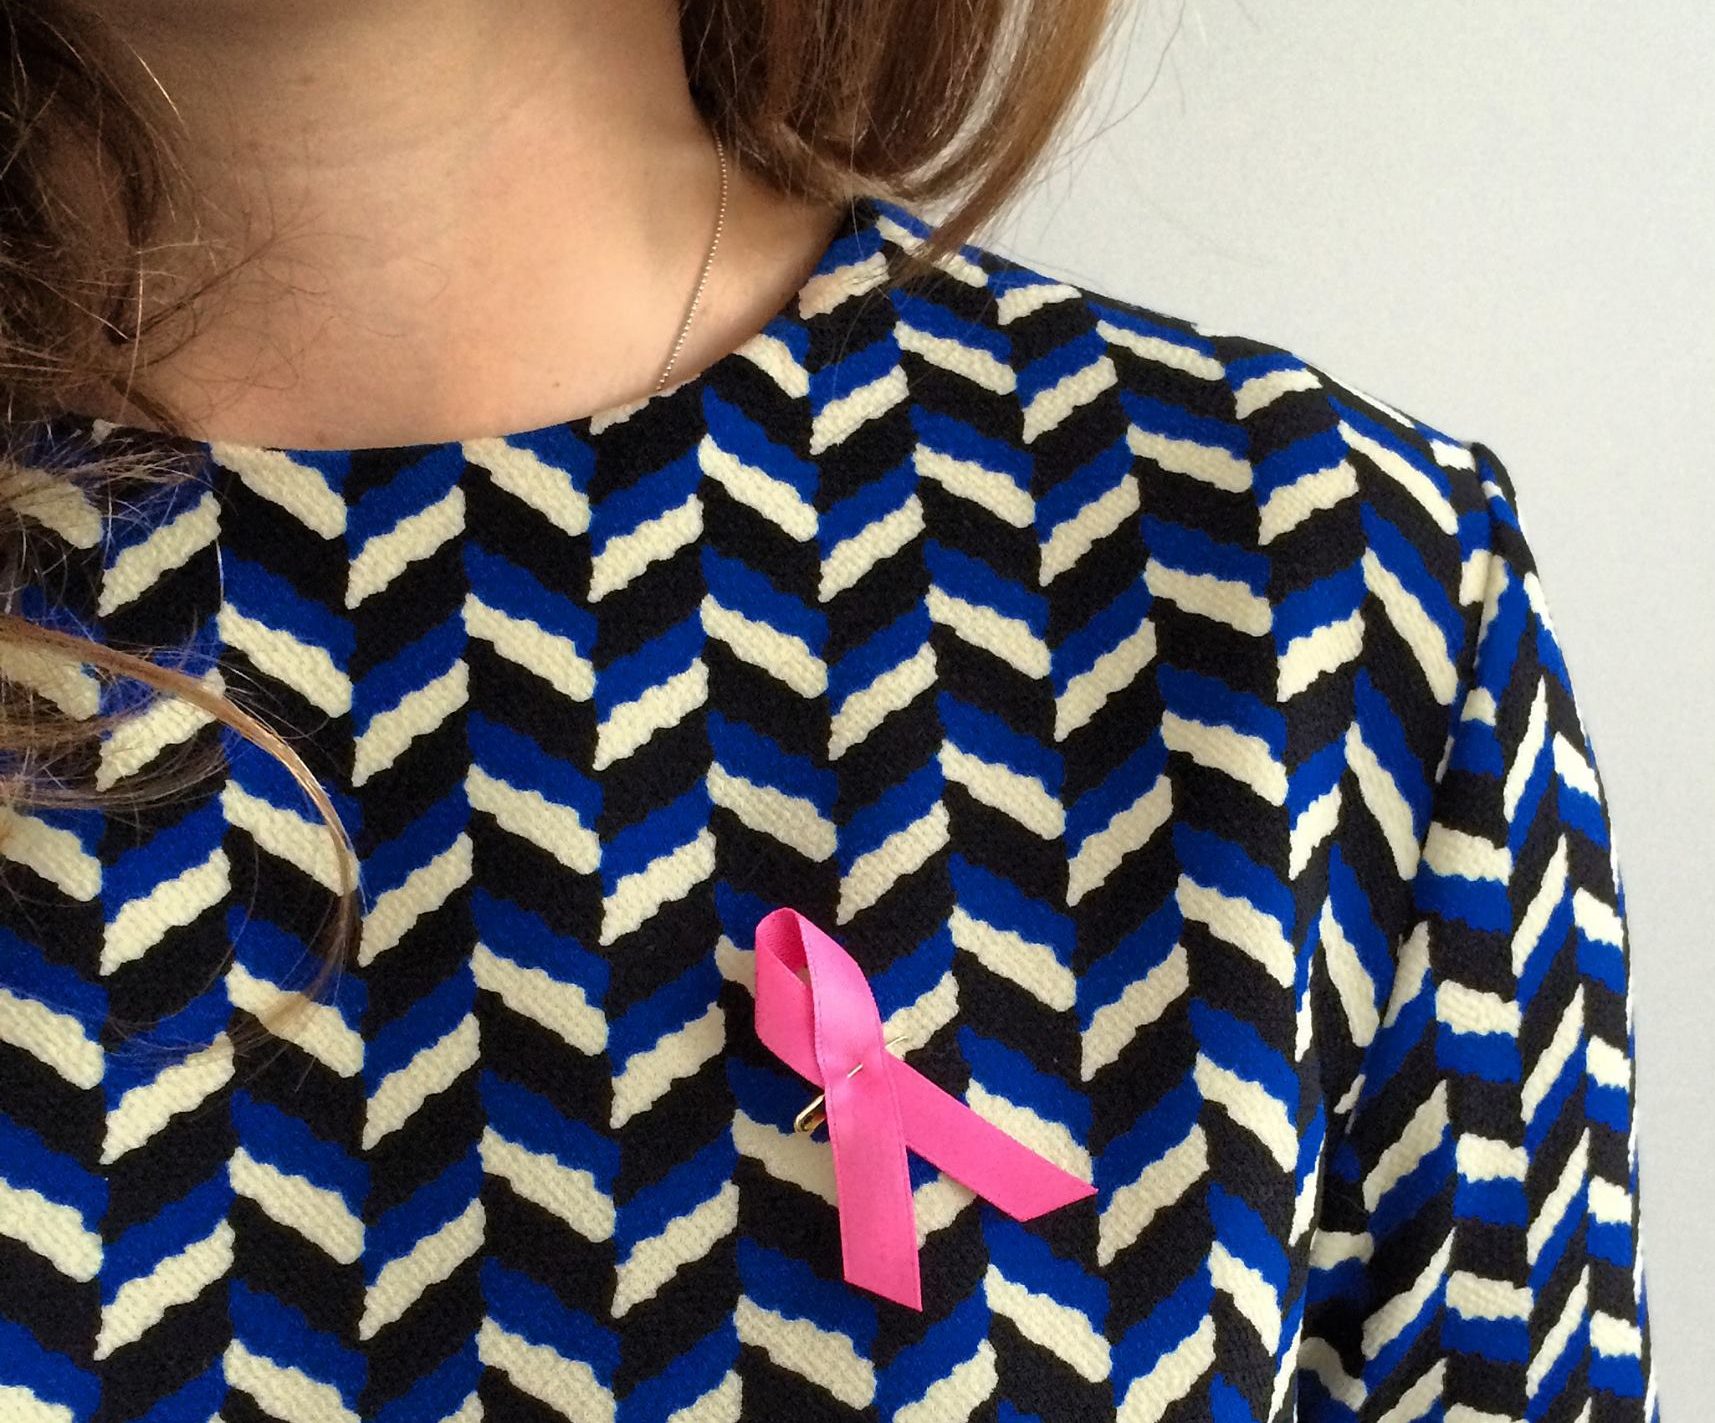 Breast Cancer Awareness Month: Mammograms, signs, ways to give back – woman wearing a pink ribbon